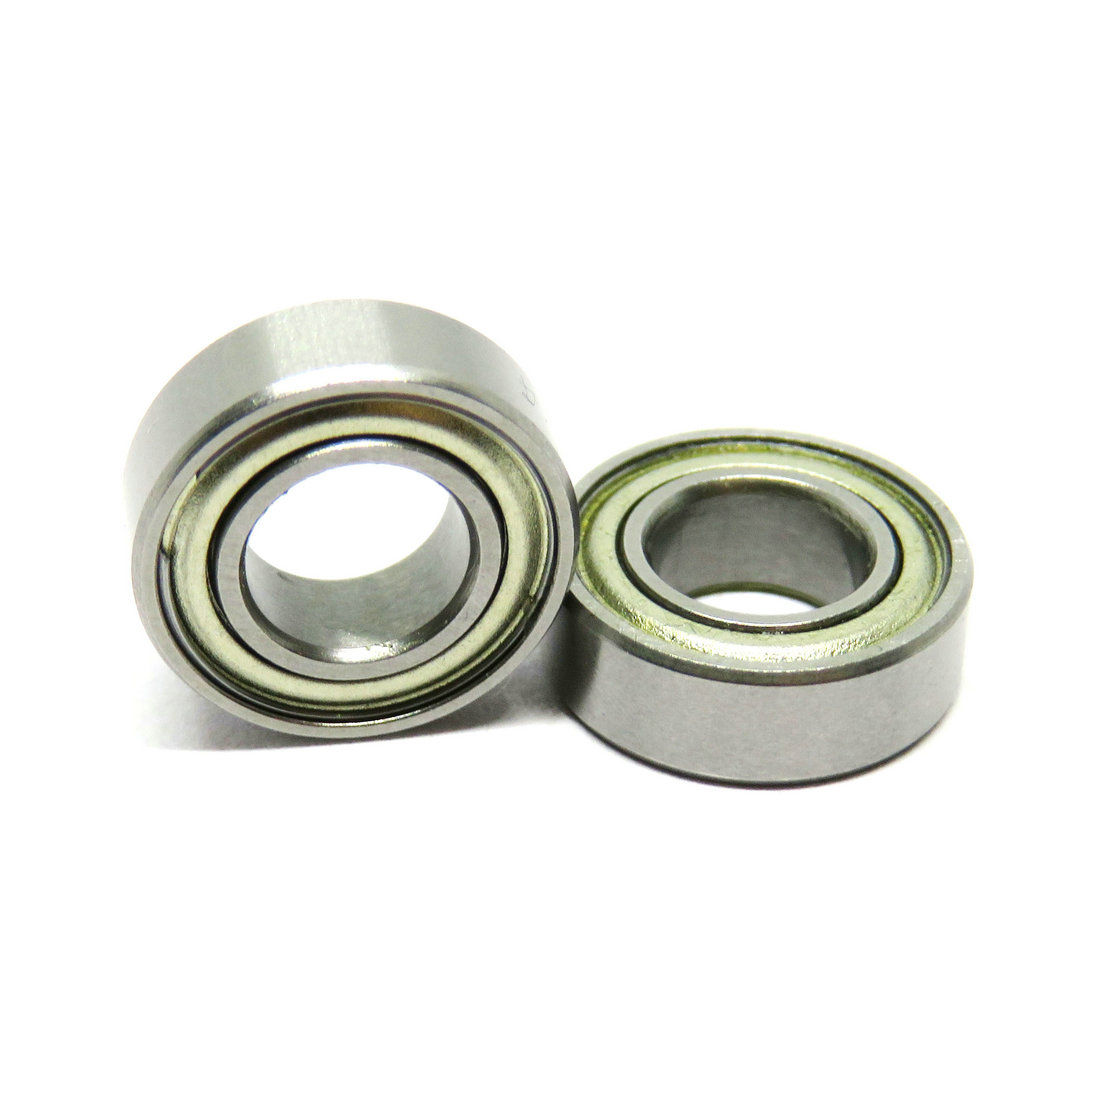 The MR126 ZZ is a 6 mm Ball Bearing that can be used in many rotary and factory automation applications.    The MR126ZZ ball bearing has a single row raceway and it is shielded on each side.   The MR126 2Z 6 mm Ball Bearing Inner Dimension 6mm X Outer Dimension 12mm X Width 3mm is an metal shield ball bearing designed for high rotational speeds and high dynamic loads..jpg